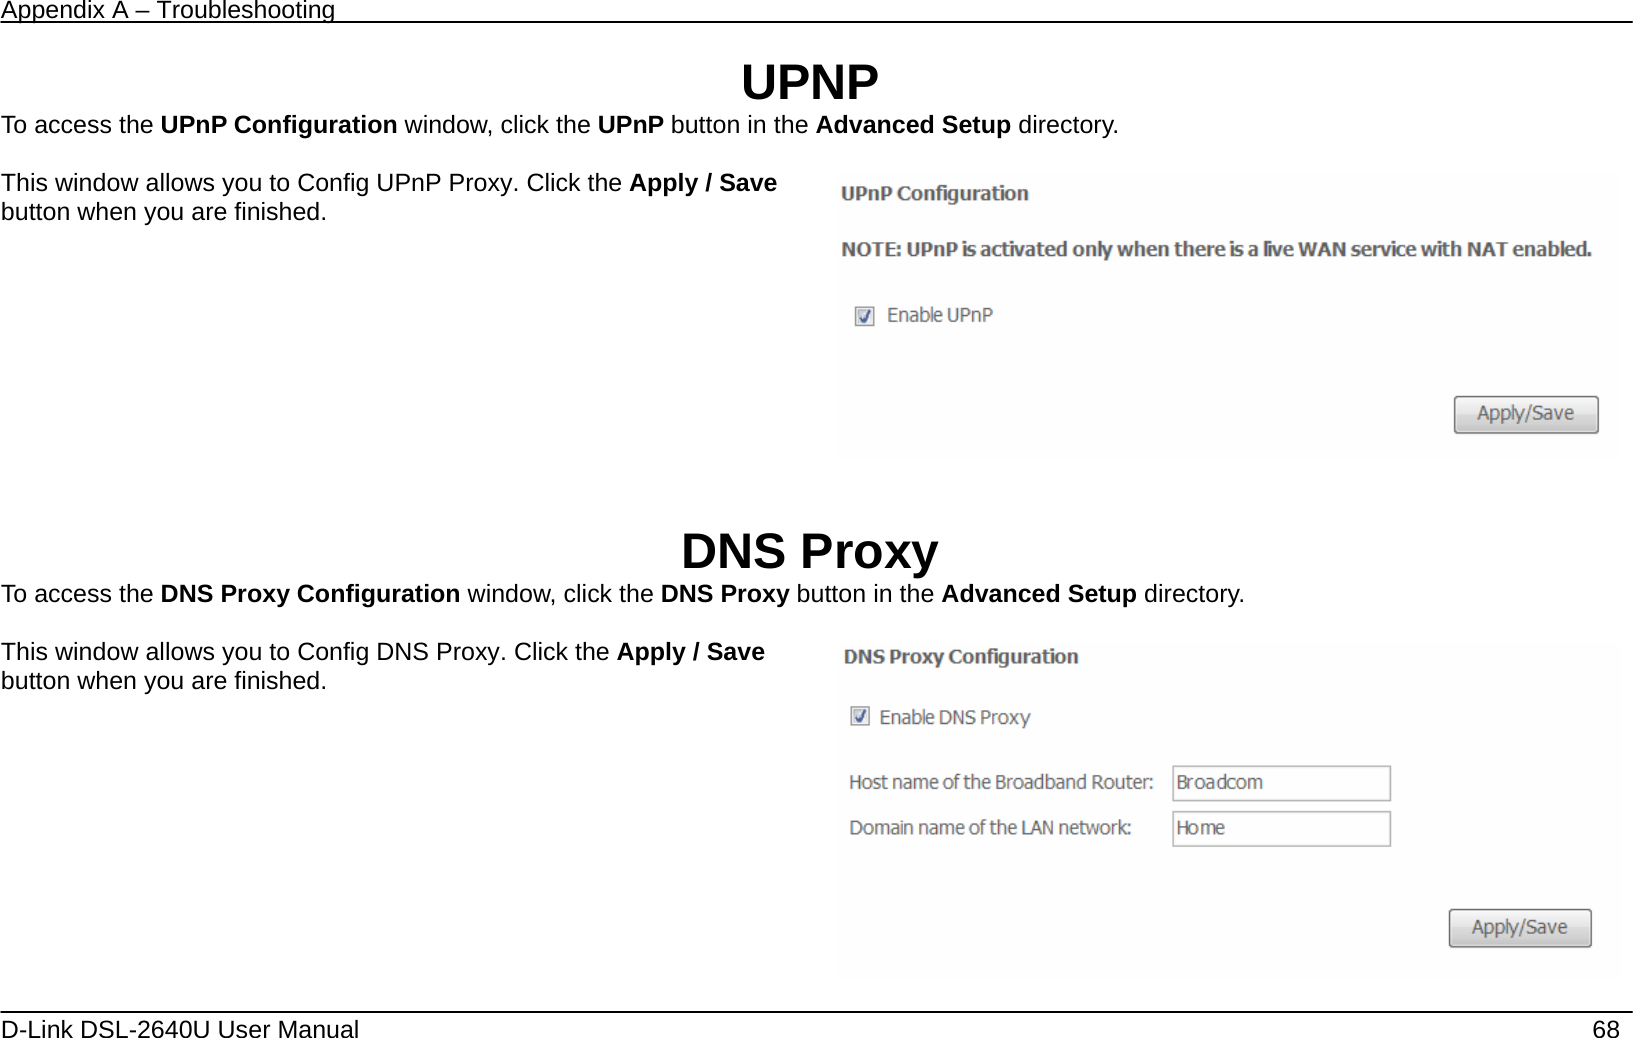 Appendix A – Troubleshooting   D-Link DSL-2640U User Manual    68 UPNP To access the UPnP Configuration window, click the UPnP button in the Advanced Setup directory.  This window allows you to Config UPnP Proxy. Click the Apply / Save button when you are finished.       DNS Proxy To access the DNS Proxy Configuration window, click the DNS Proxy button in the Advanced Setup directory.  This window allows you to Config DNS Proxy. Click the Apply / Save button when you are finished.      